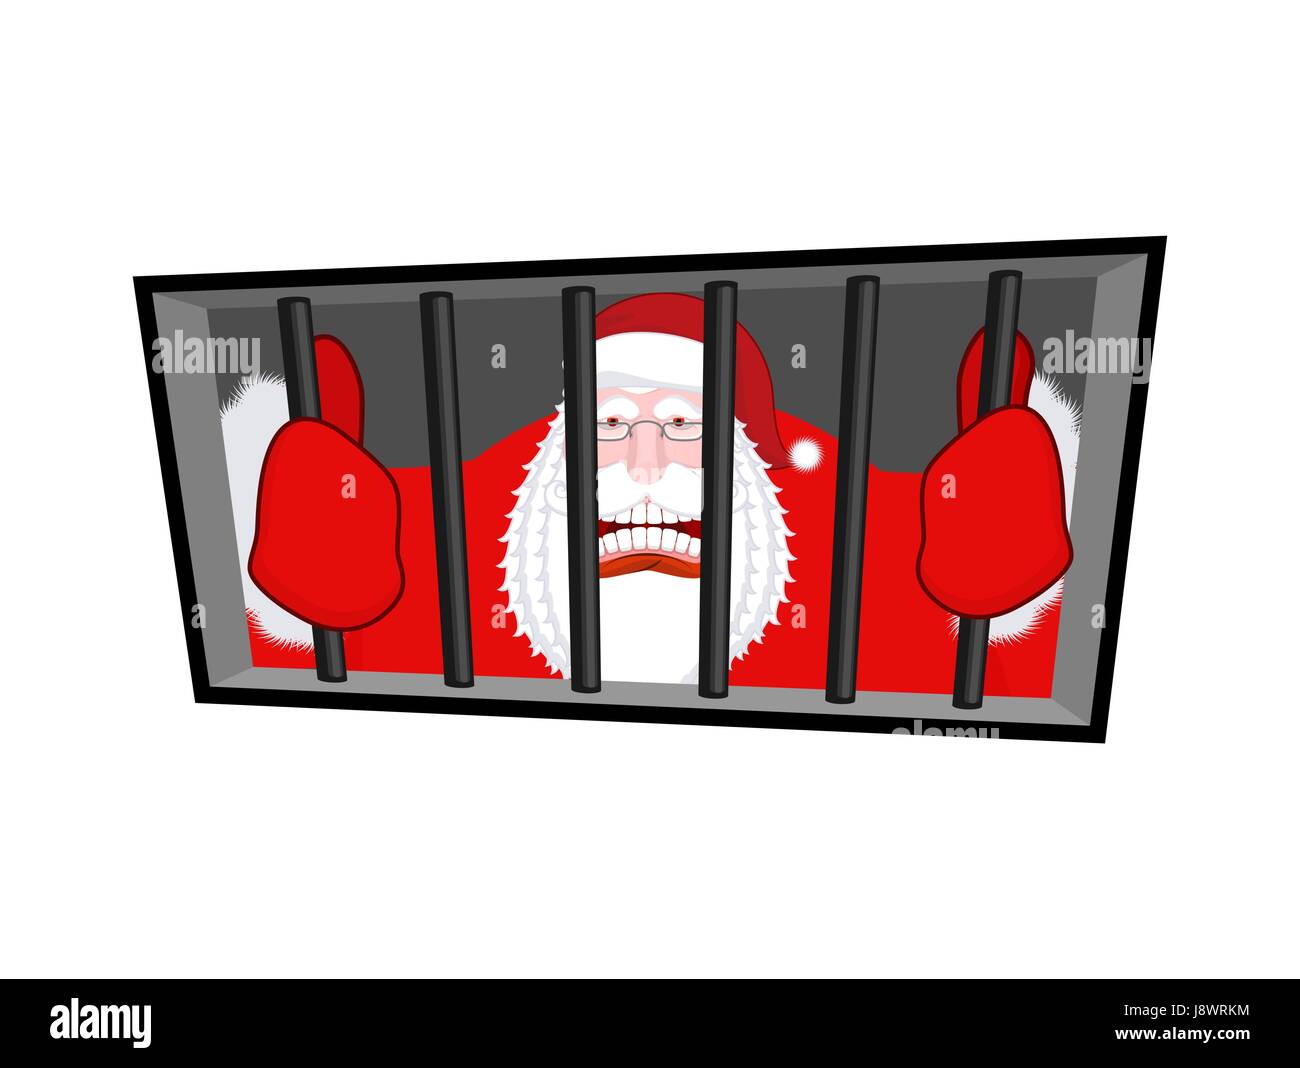 Santa Claus gangster. Christmas in prison. Window in prison with bars. Bad Santa prisoner criminal. New year is canceled. Jail break. Stock Vector